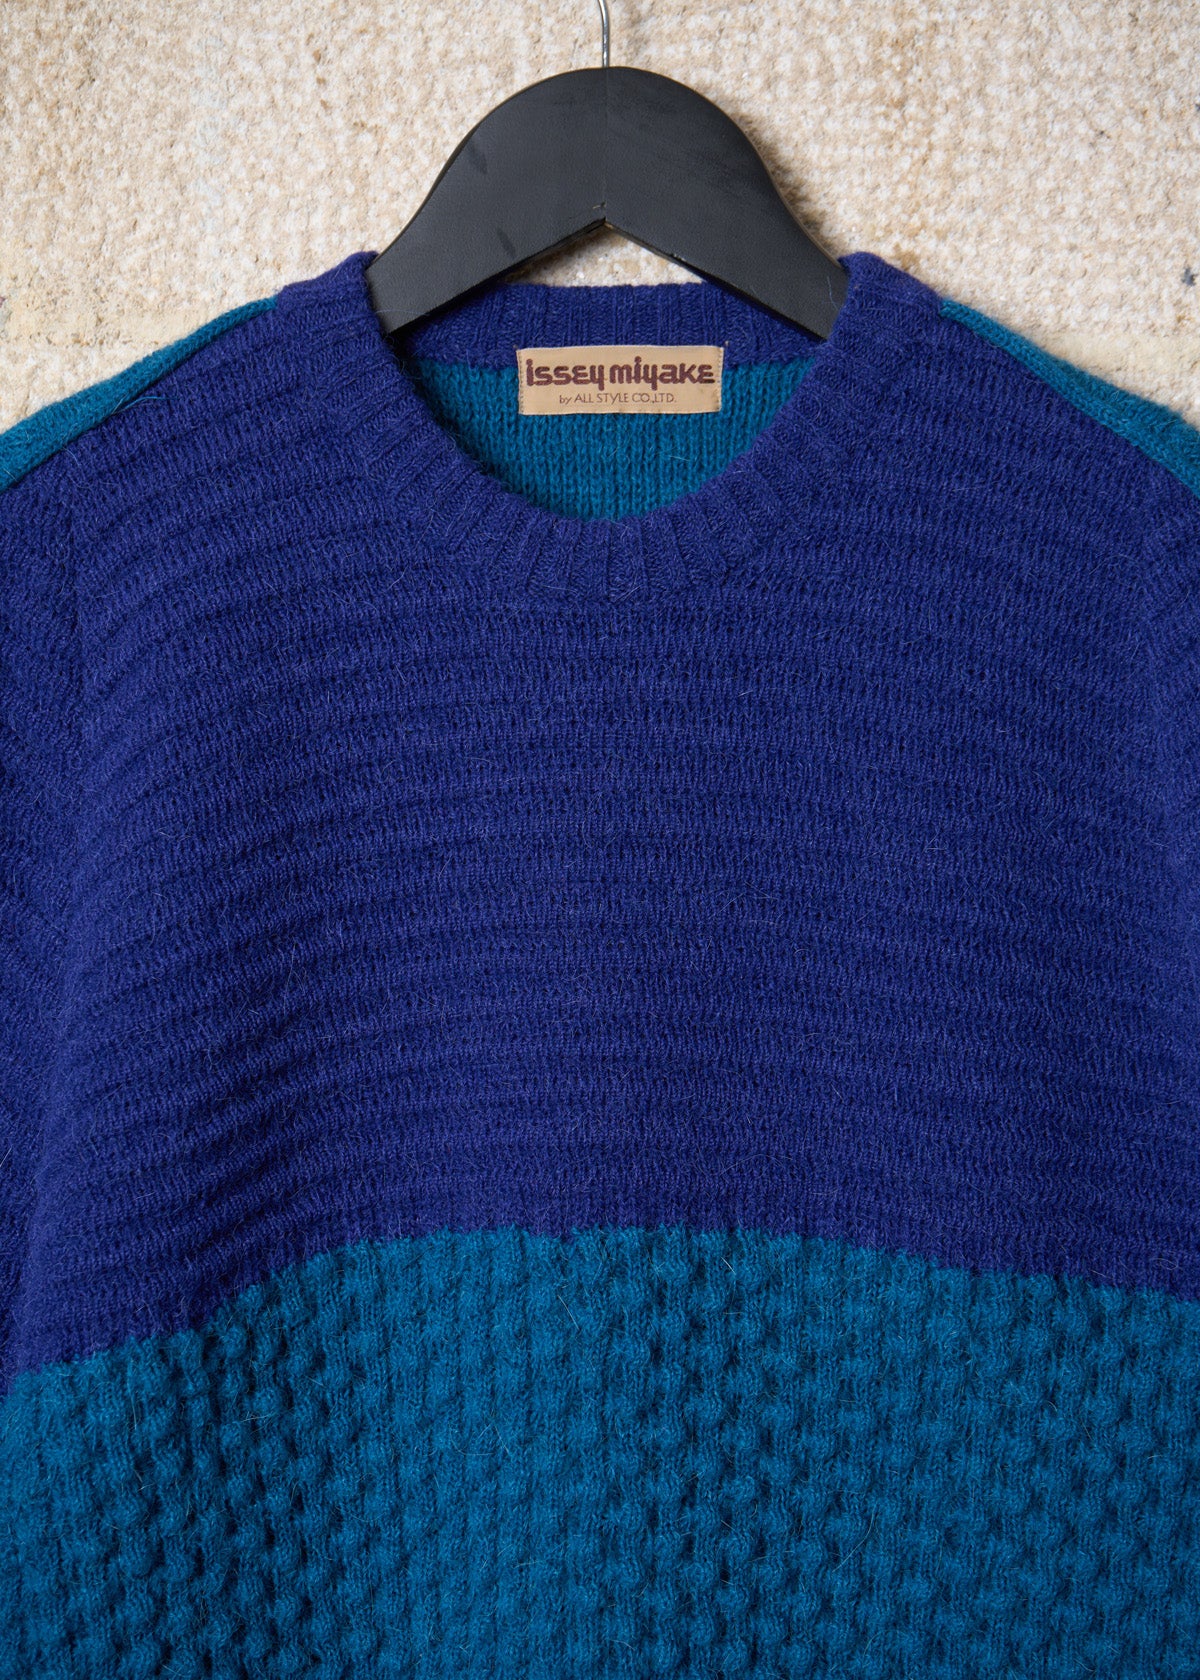 All Style Blue Two Tones Mixed Pattern Crewneck Jumper 1970's - Small